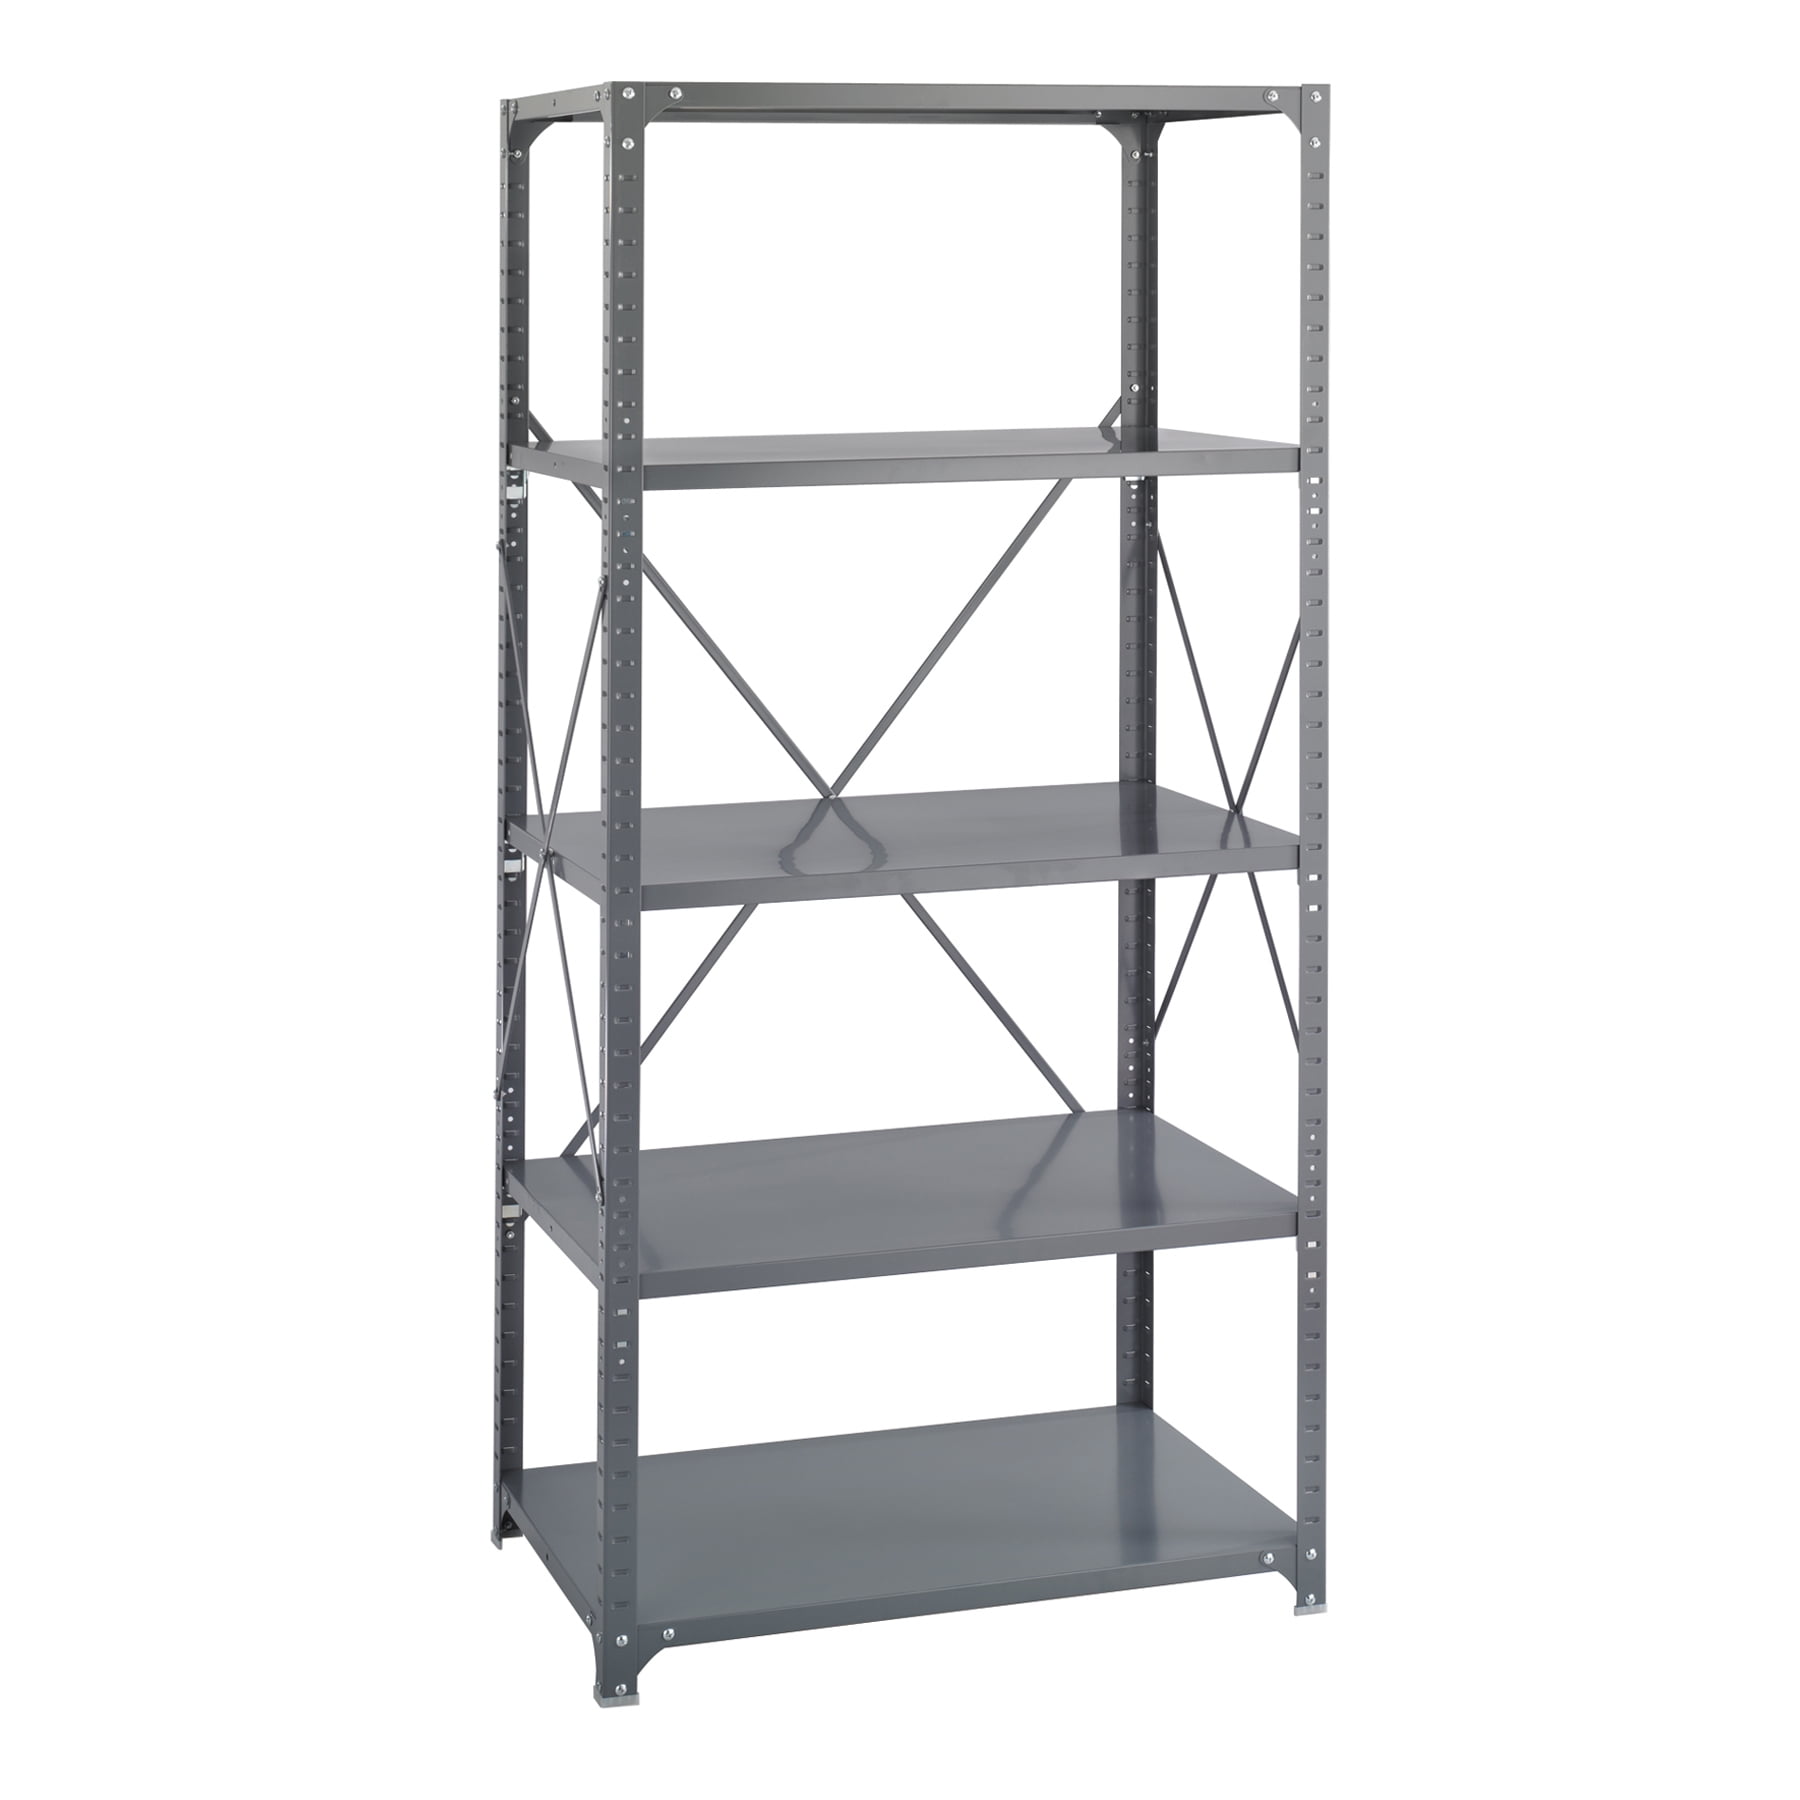 Safco 6267 Steel Shelving 36 X 24, 36 Inch Wide Shelving Unit